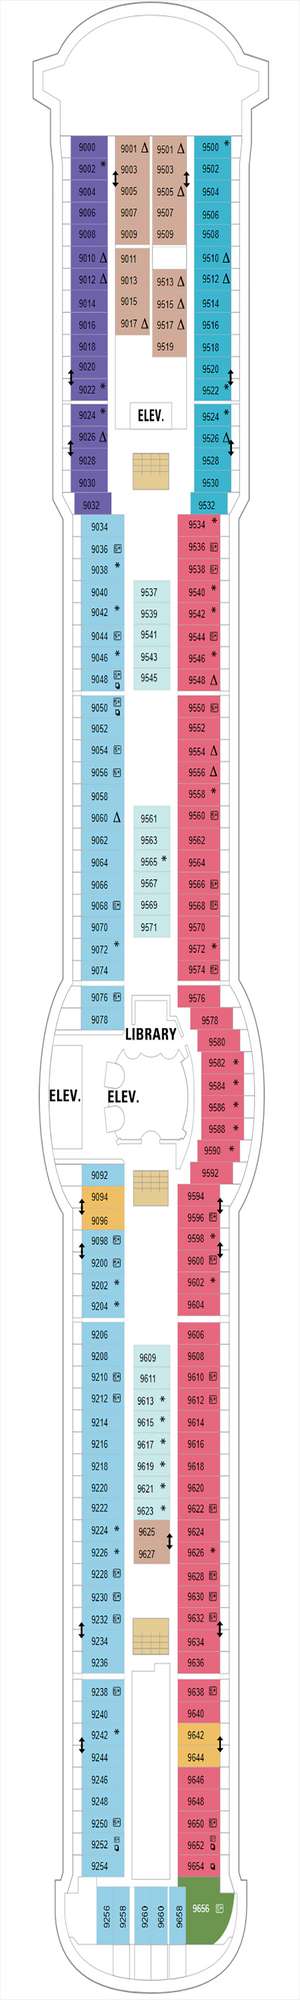 Deck plan for Radiance of the Seas